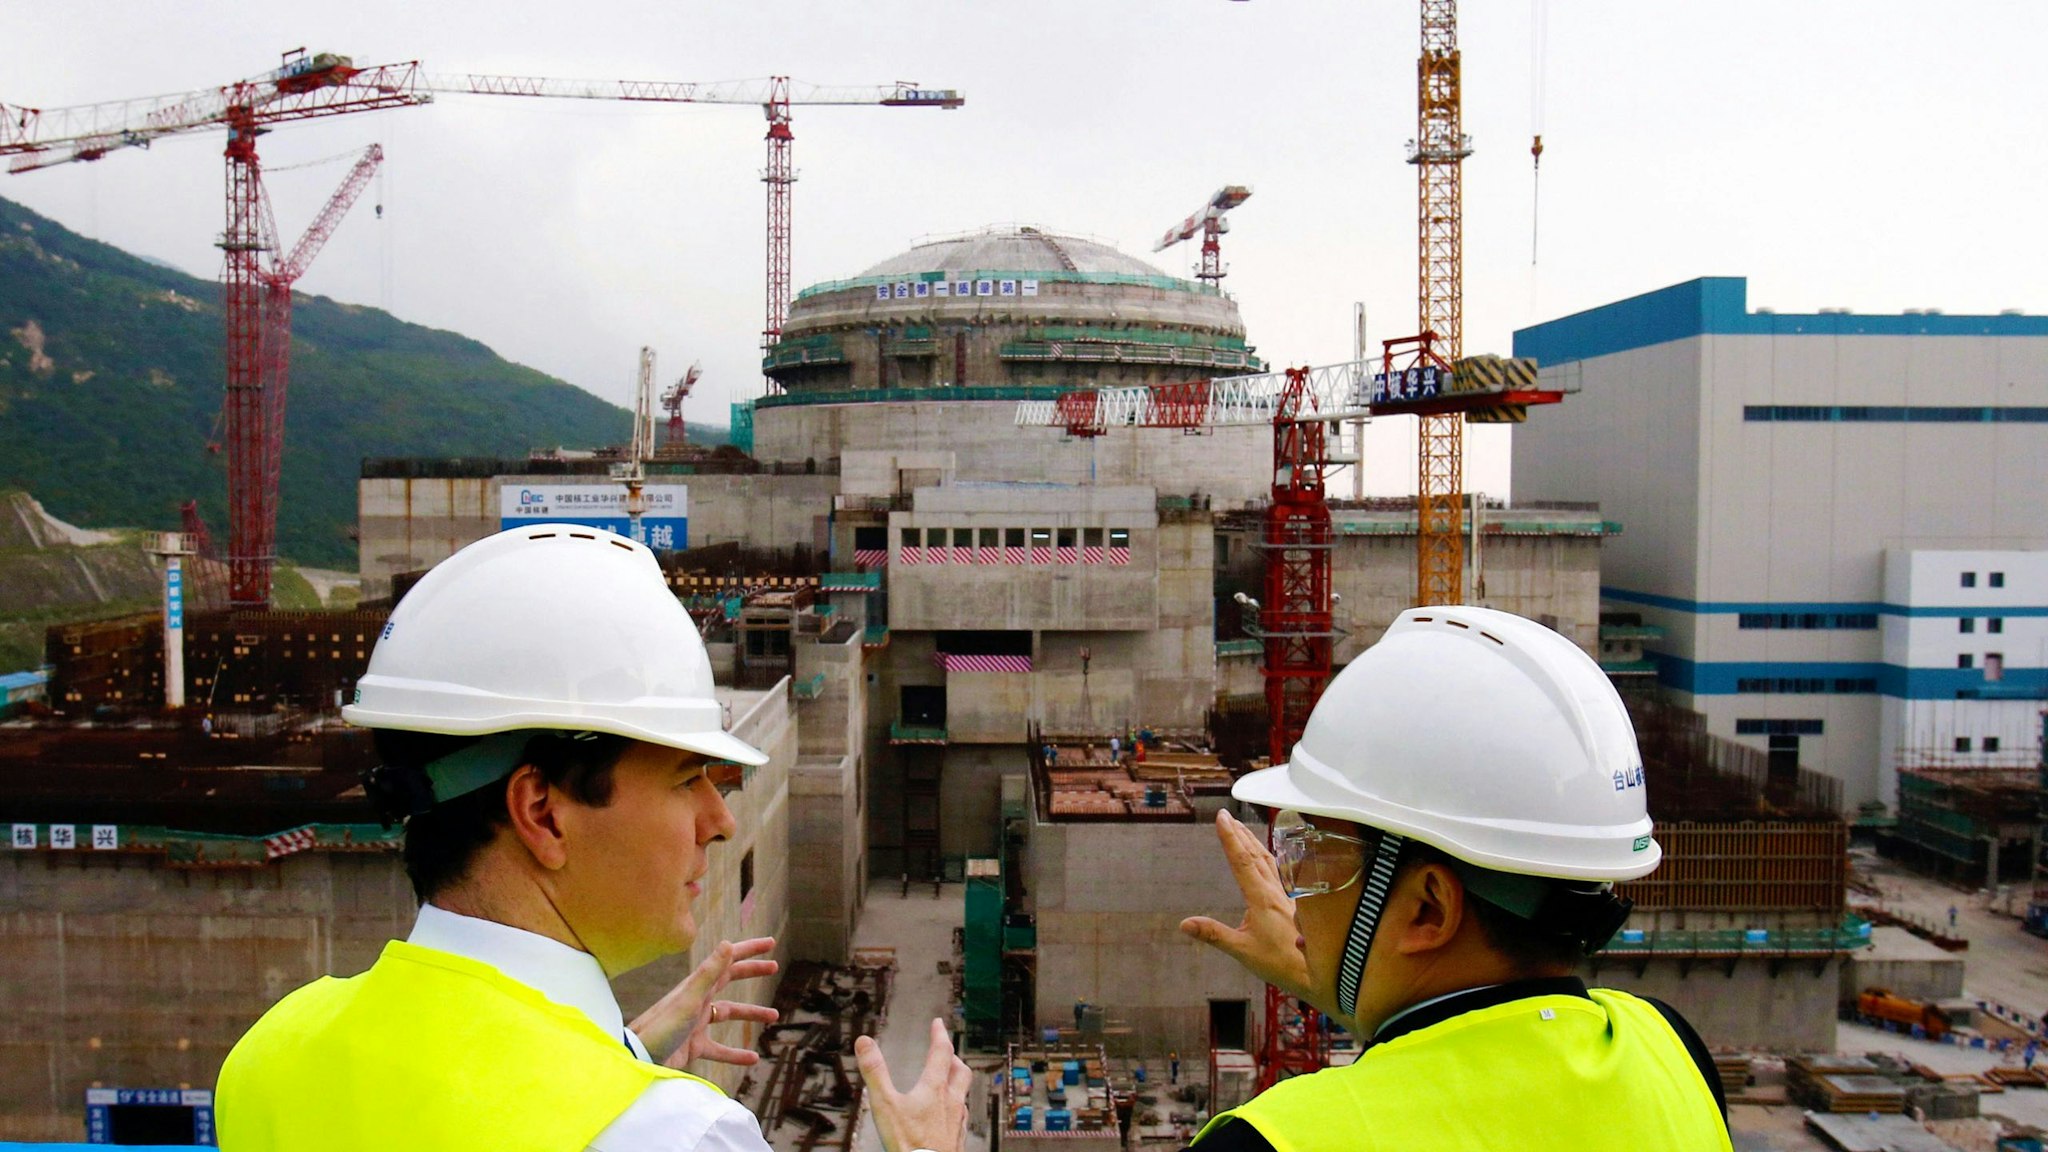 TAISHAN, CHINA - OCTOBER 17: British Chancellor of the Exchequer George Osborne talks with Guo Liming of Taishan Nuclear Power Joint Venture Co Ltd (R) as he tours a nuclear reactor under construction at Taishan power plant on October 17, 2013 in Taishan, Guangdong province, China. Chancellor George Osborne has announced on the last day of his trade visit that future generations of British nuclear power plants will be funded, developed and managed in joint UK and Chinese partnership agreements, with China expected to hold majority stakes.